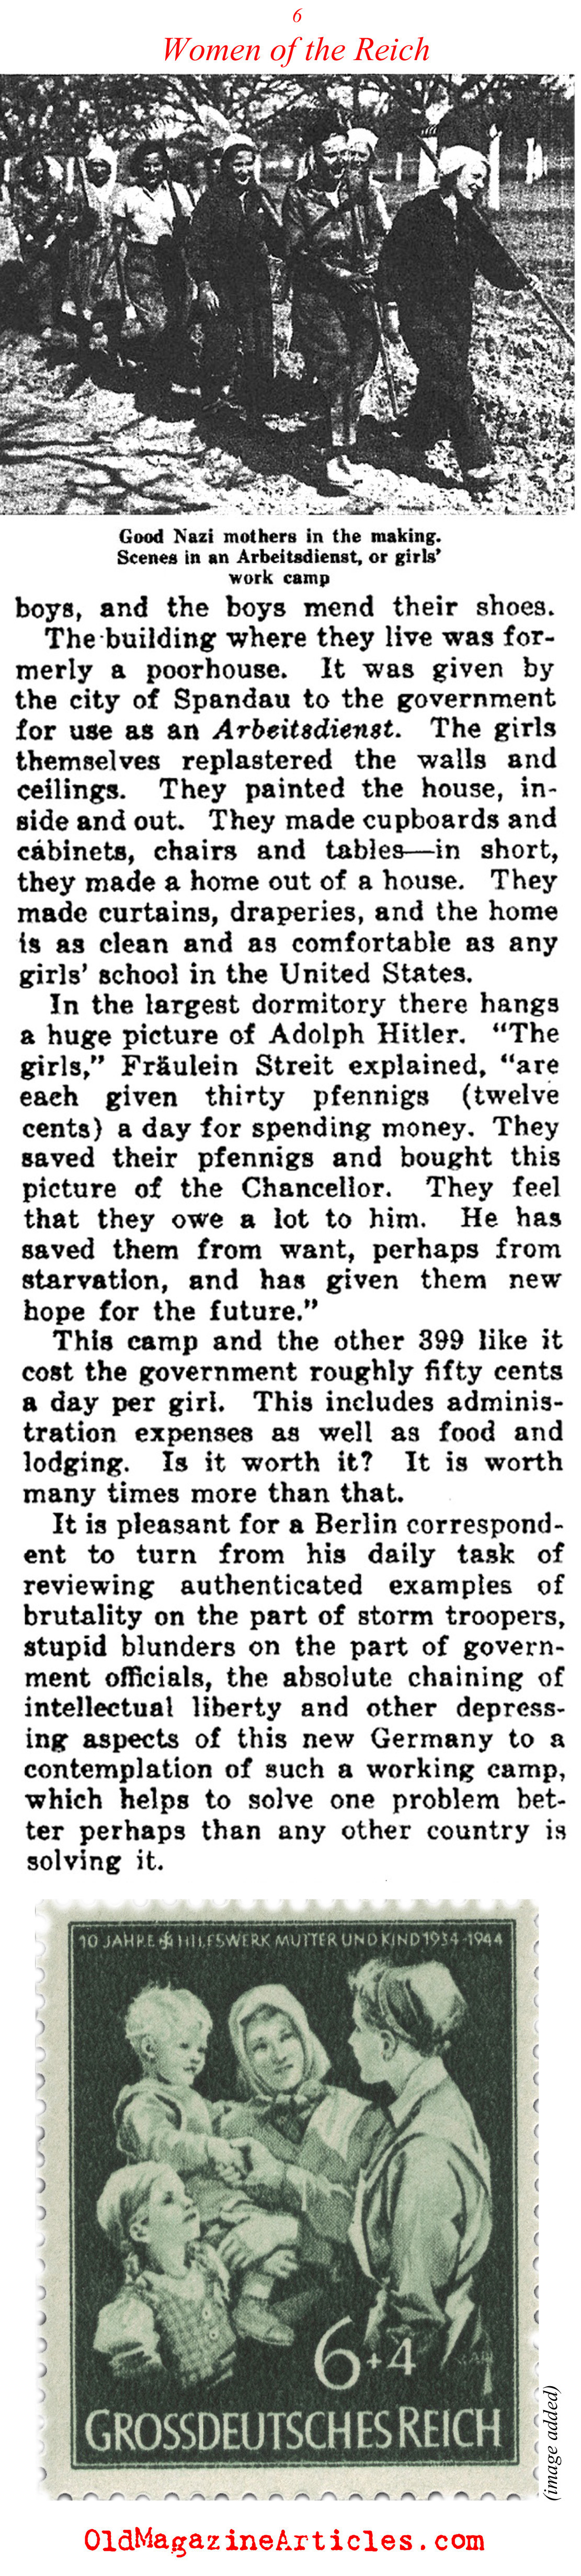 A Woman's Place Within the Third Reich (Collier's Magazine, 1933)